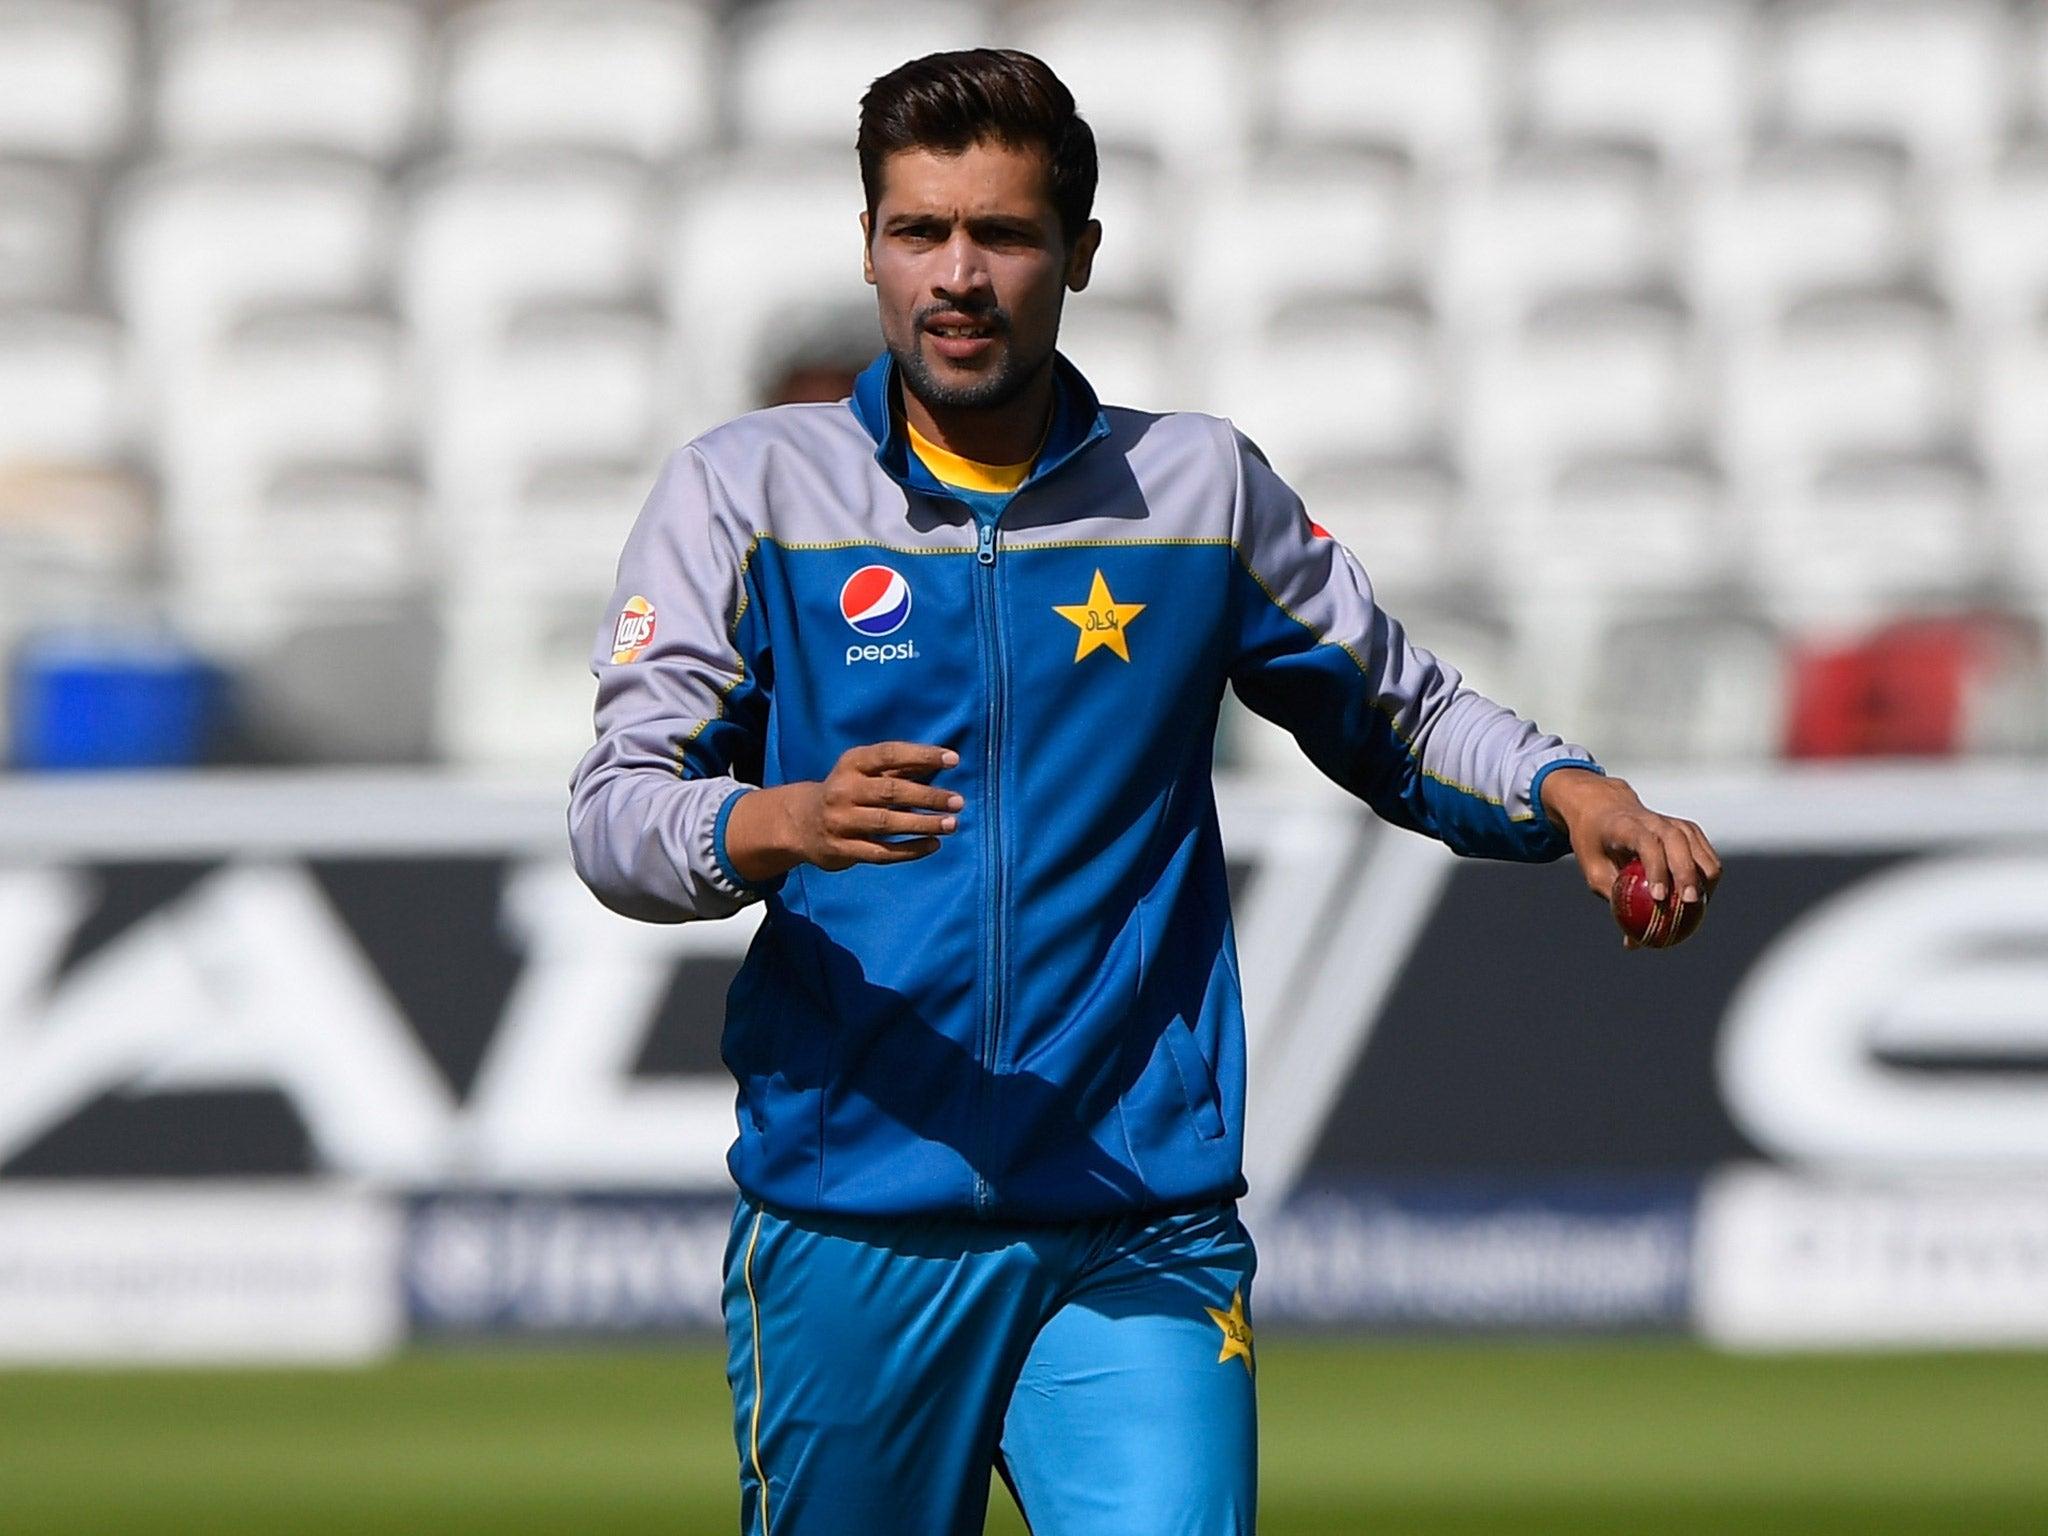 England vs Pakistan: Who is Mohammad Amir and why the fuss over him